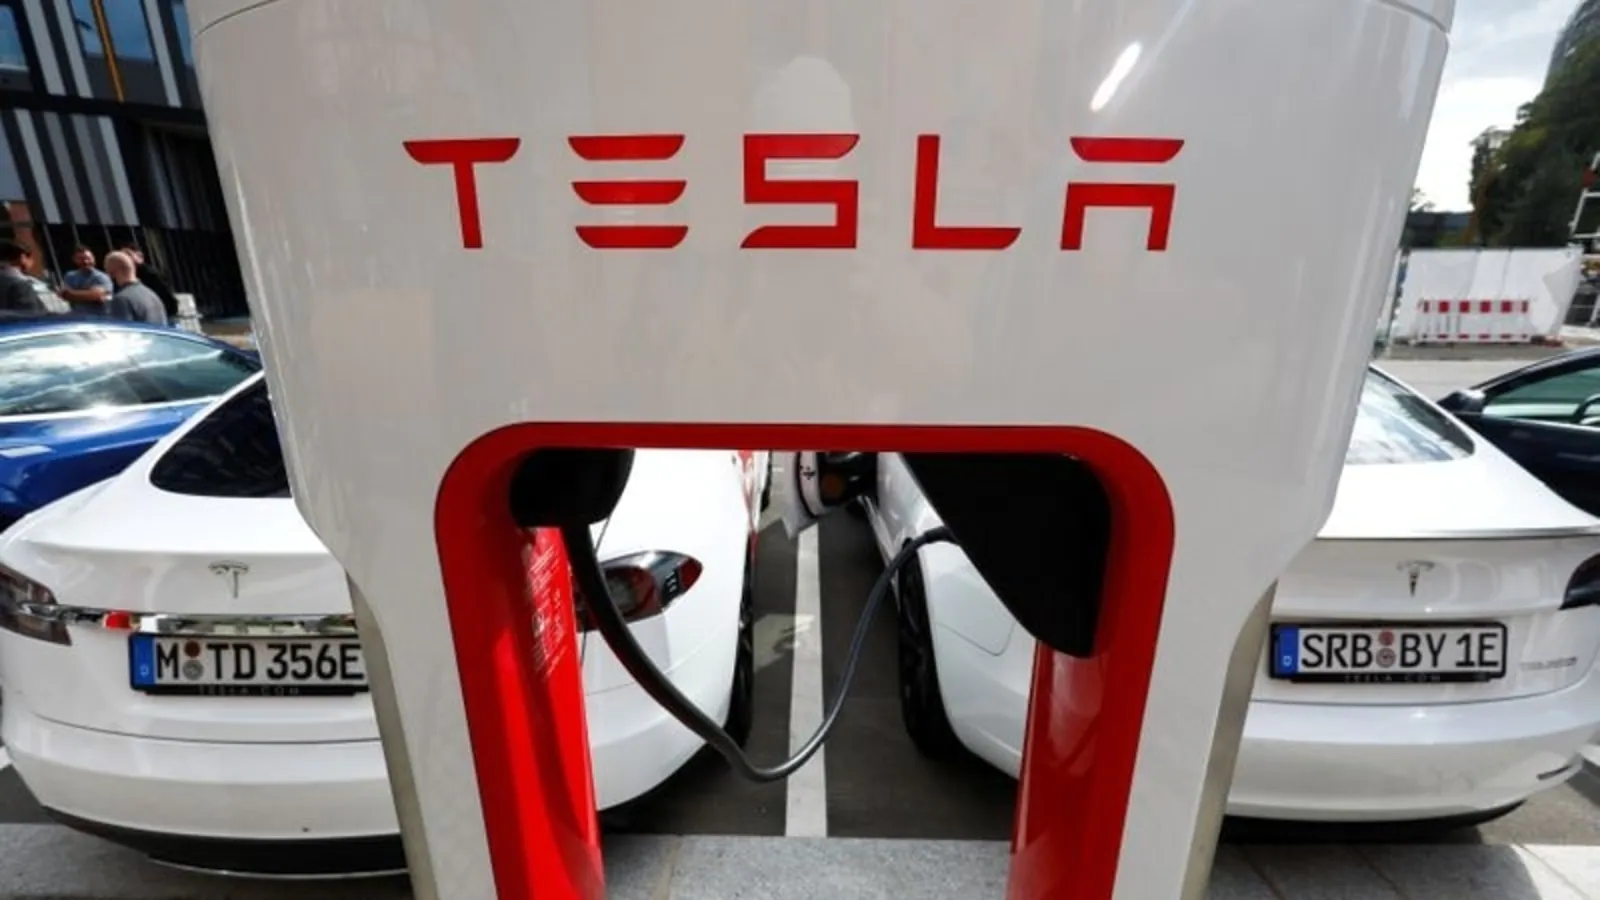 Tesla puts India entry plan on hold after deadlock on tariffs: Report